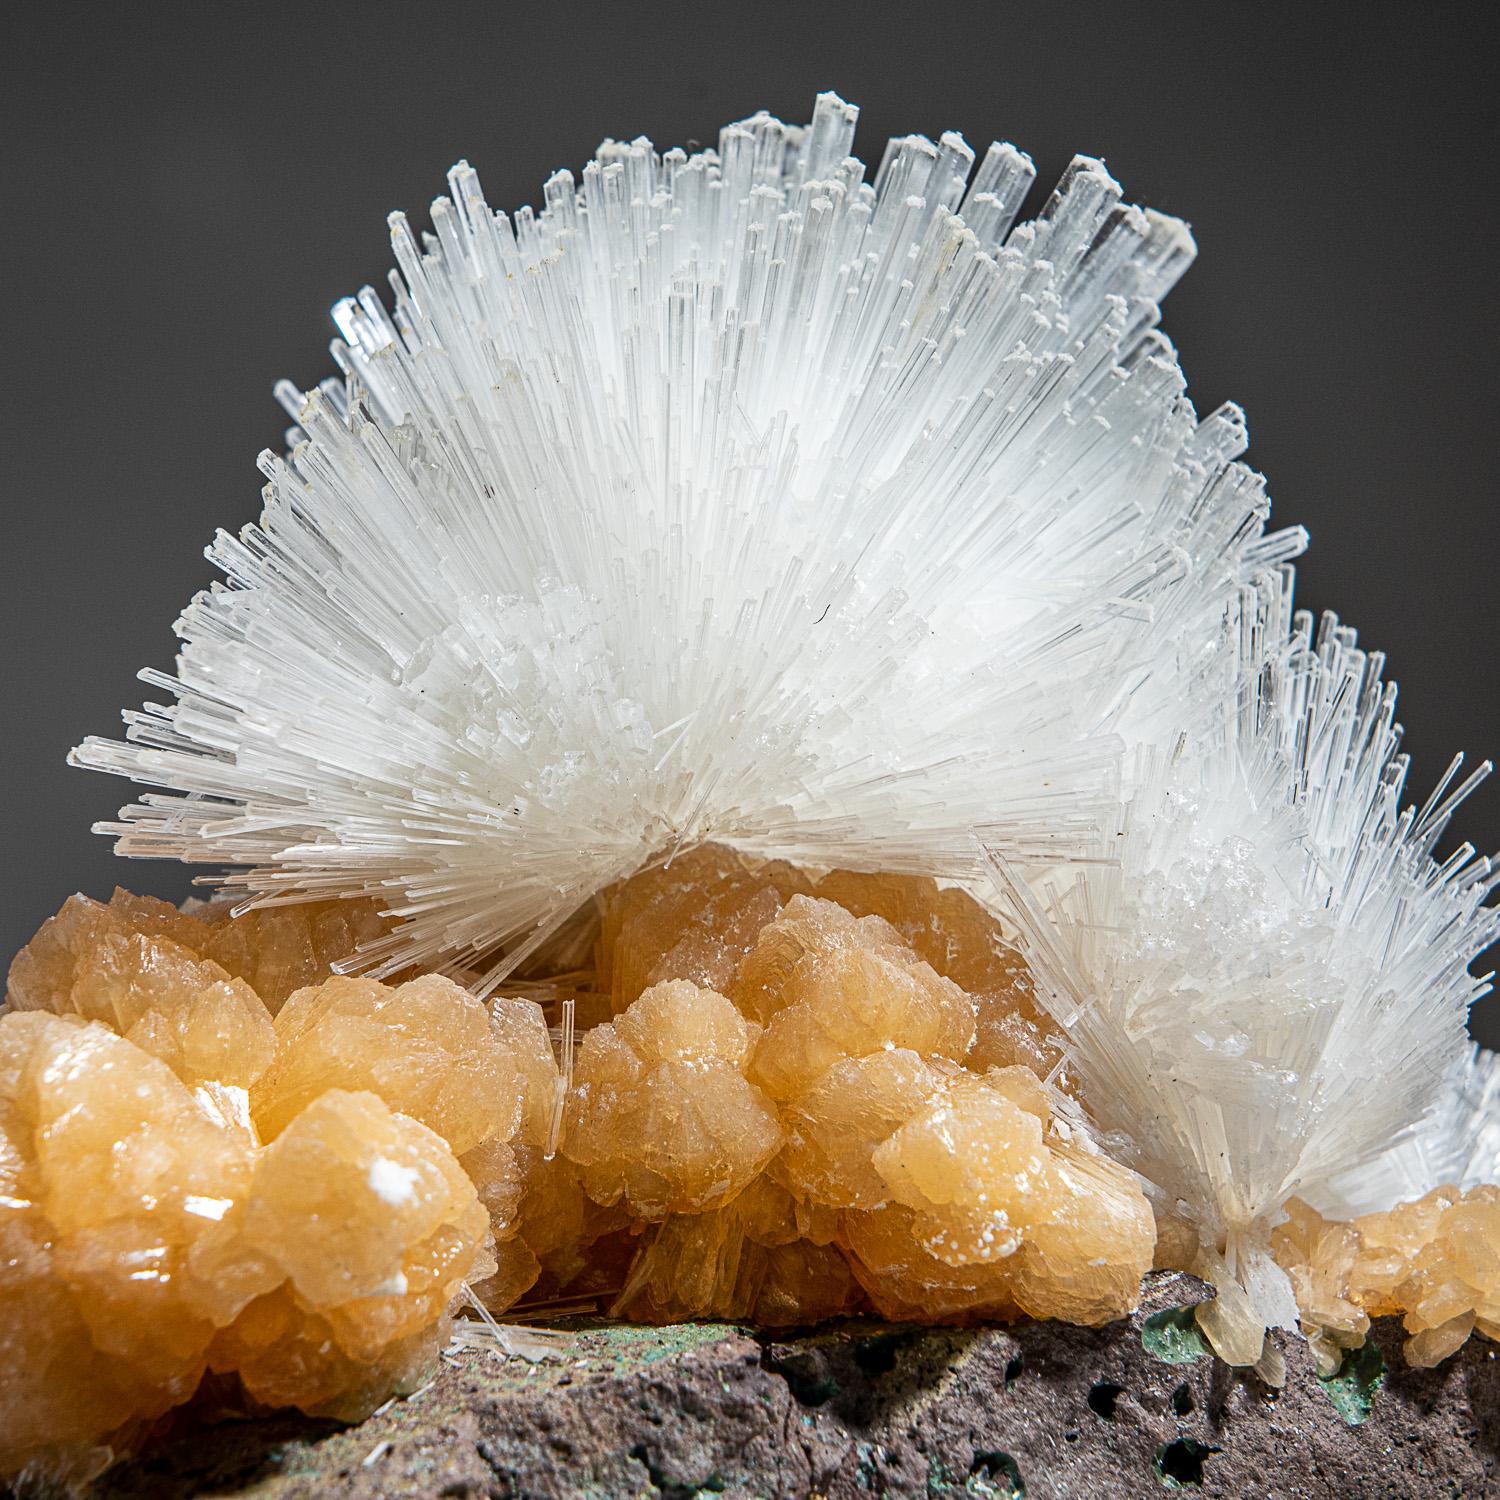 From Nasik District, Maharashtra, India

Large lustrous cluster of an acicular sprays of scolectite crystals on pink stilbite. The scolecite crystals have glassy crystal faces and are mostly translucent to transparent at the terminations.

